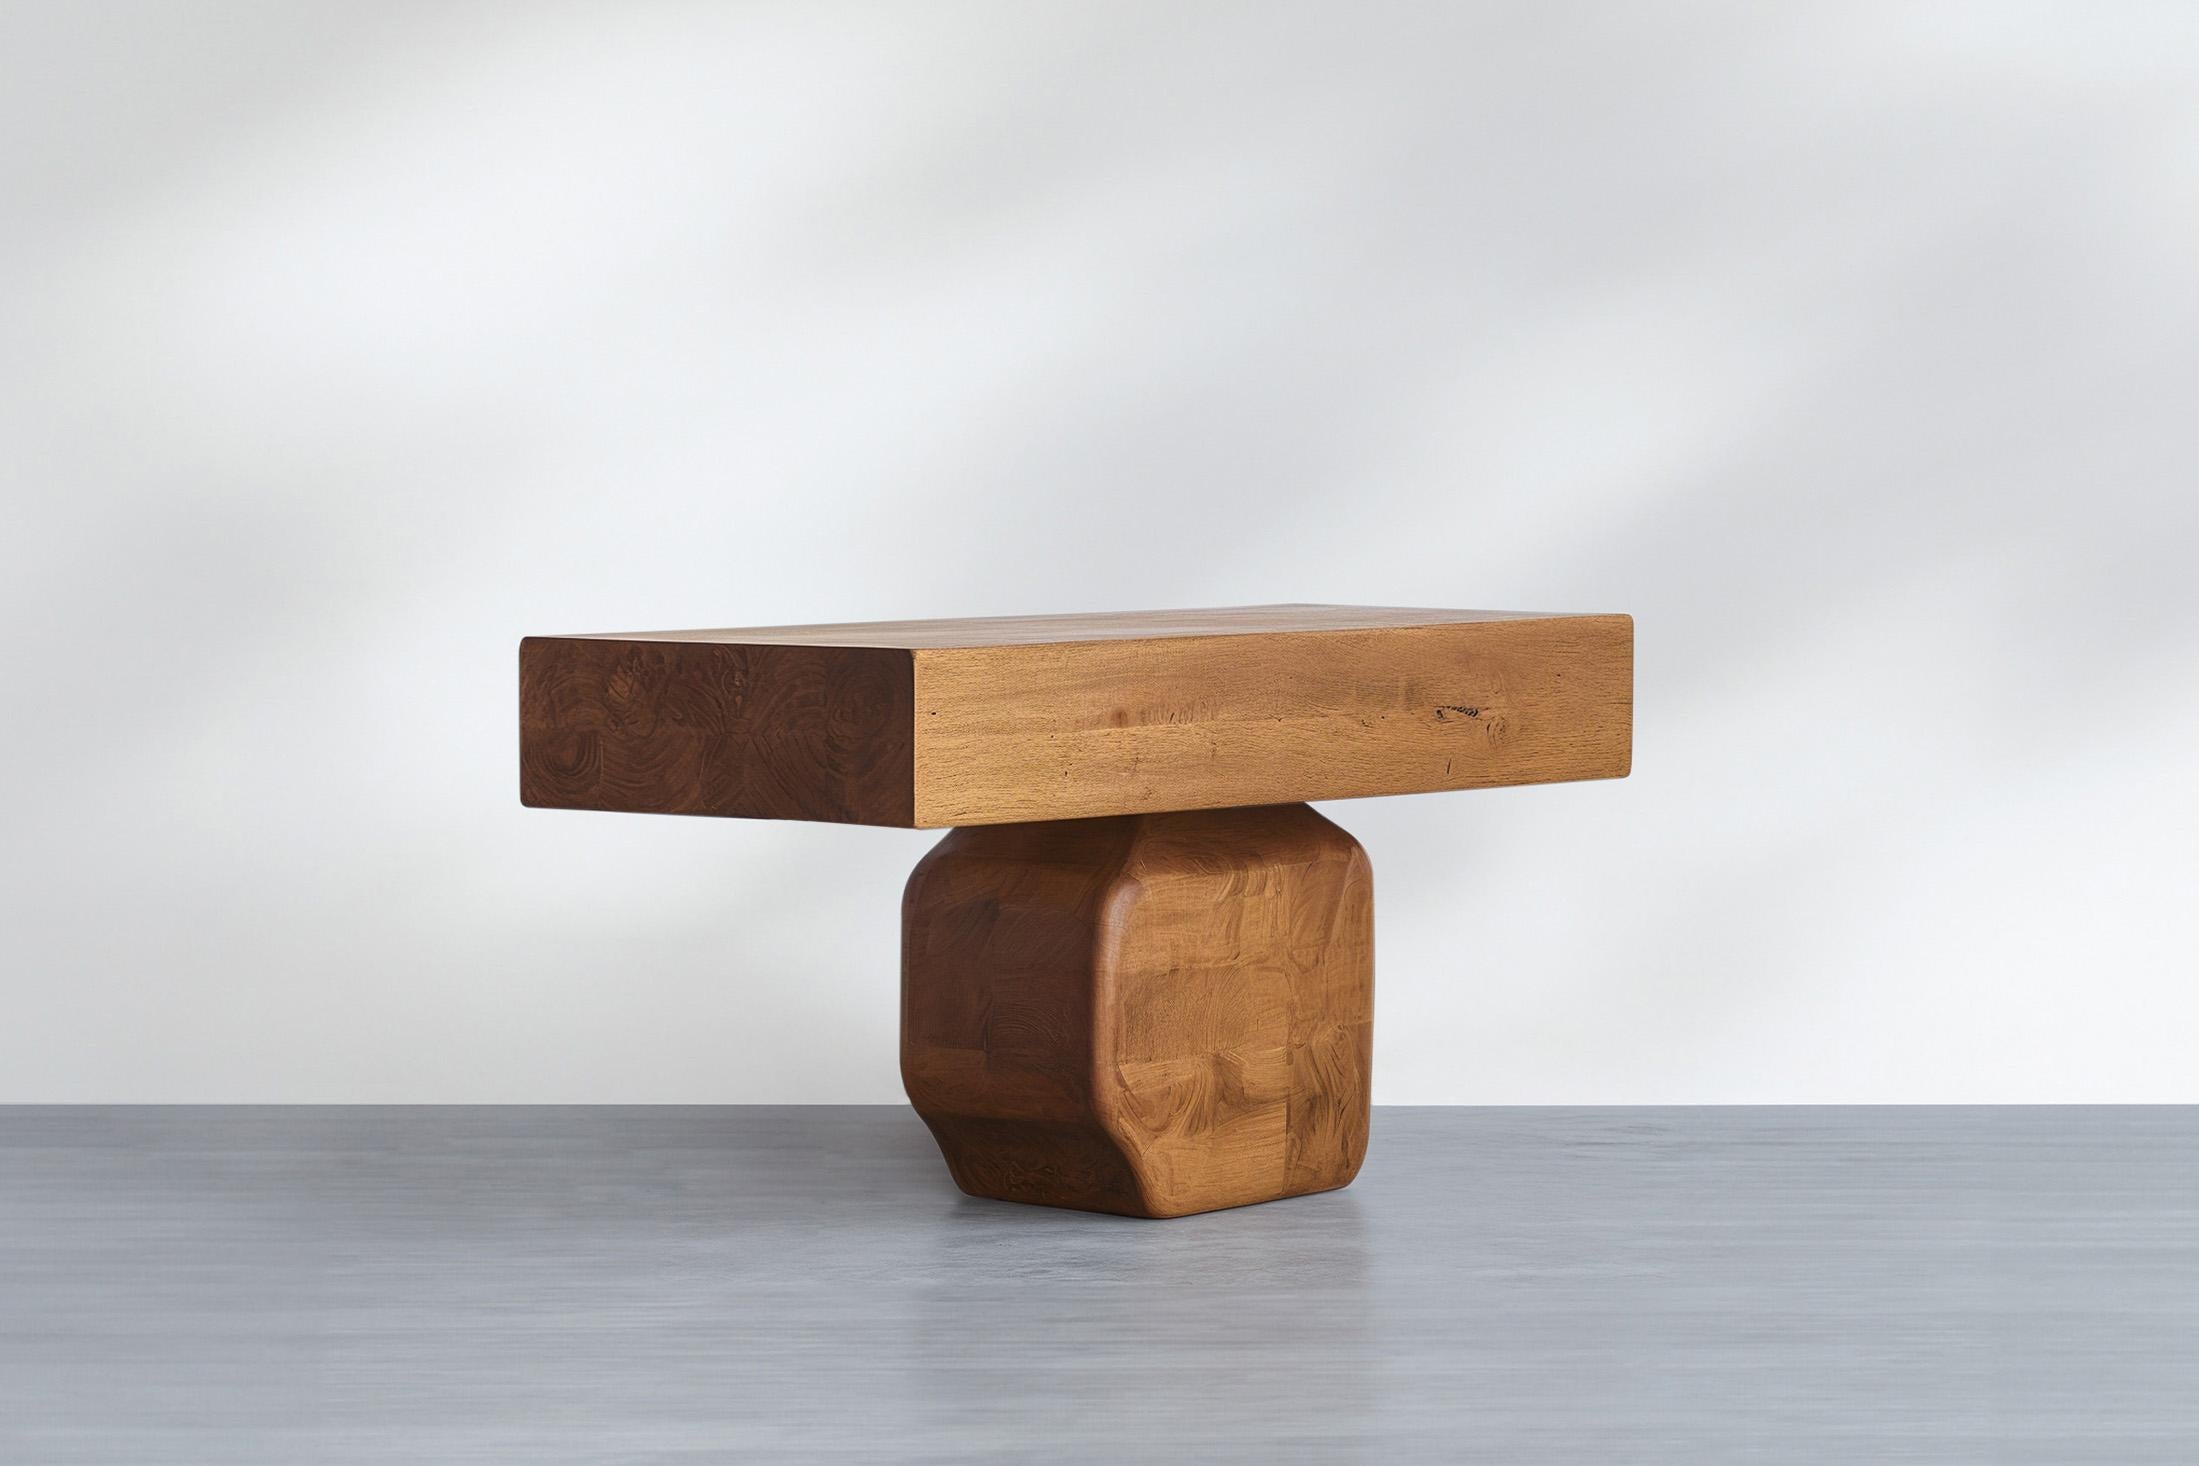 NONO Elefante Foyer Table 09, Oak Precision, Minimalist Elegance

—————————————————————
Elefante Collection: A Harmony of Design and Heritage by NONO

Crafting Elegance with a Modernist Touch

NONO, renowned for its decade-long journey in redefining